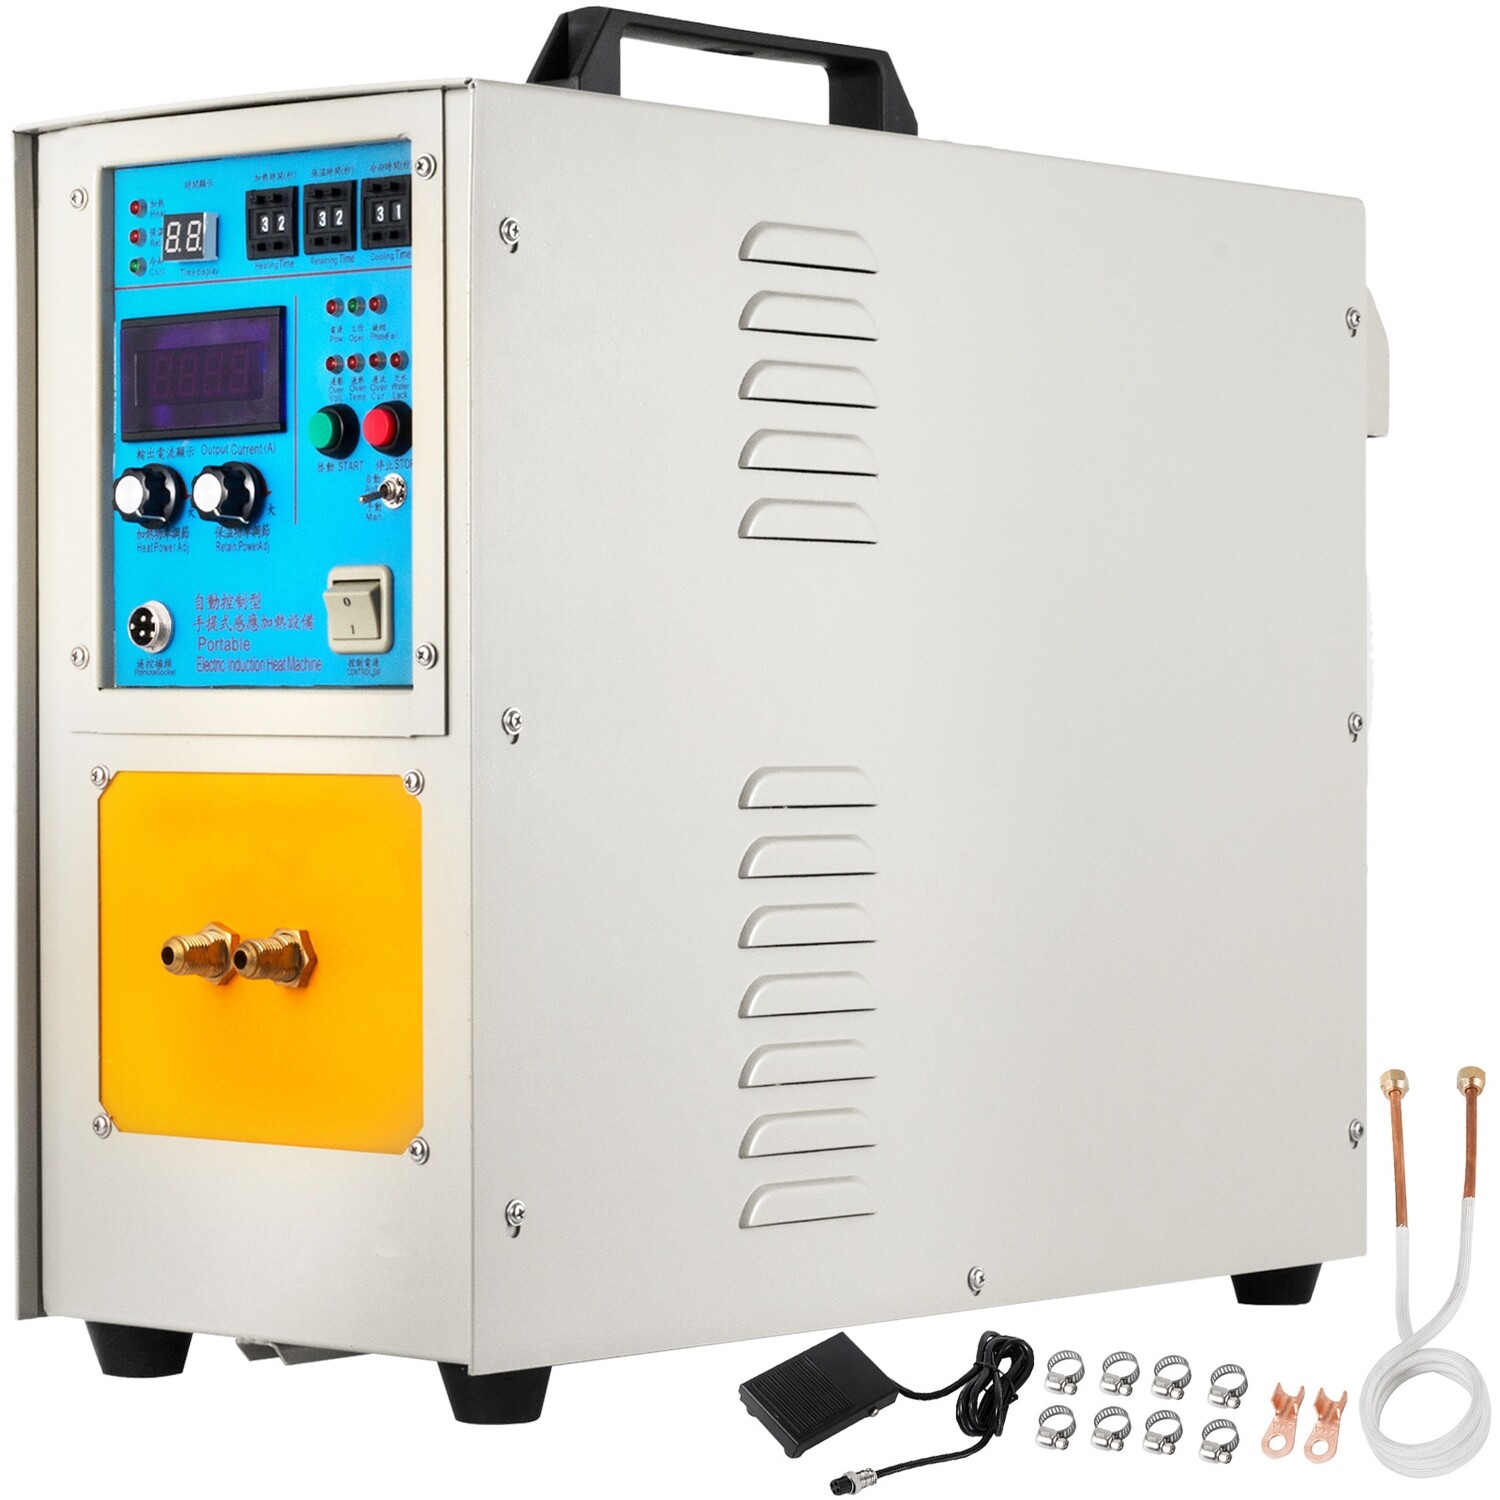 15KW High Frequency Induction Heater 30-100 KHz Heater Furnace Melting Furnace LH-15A 230V Heating Furnace System